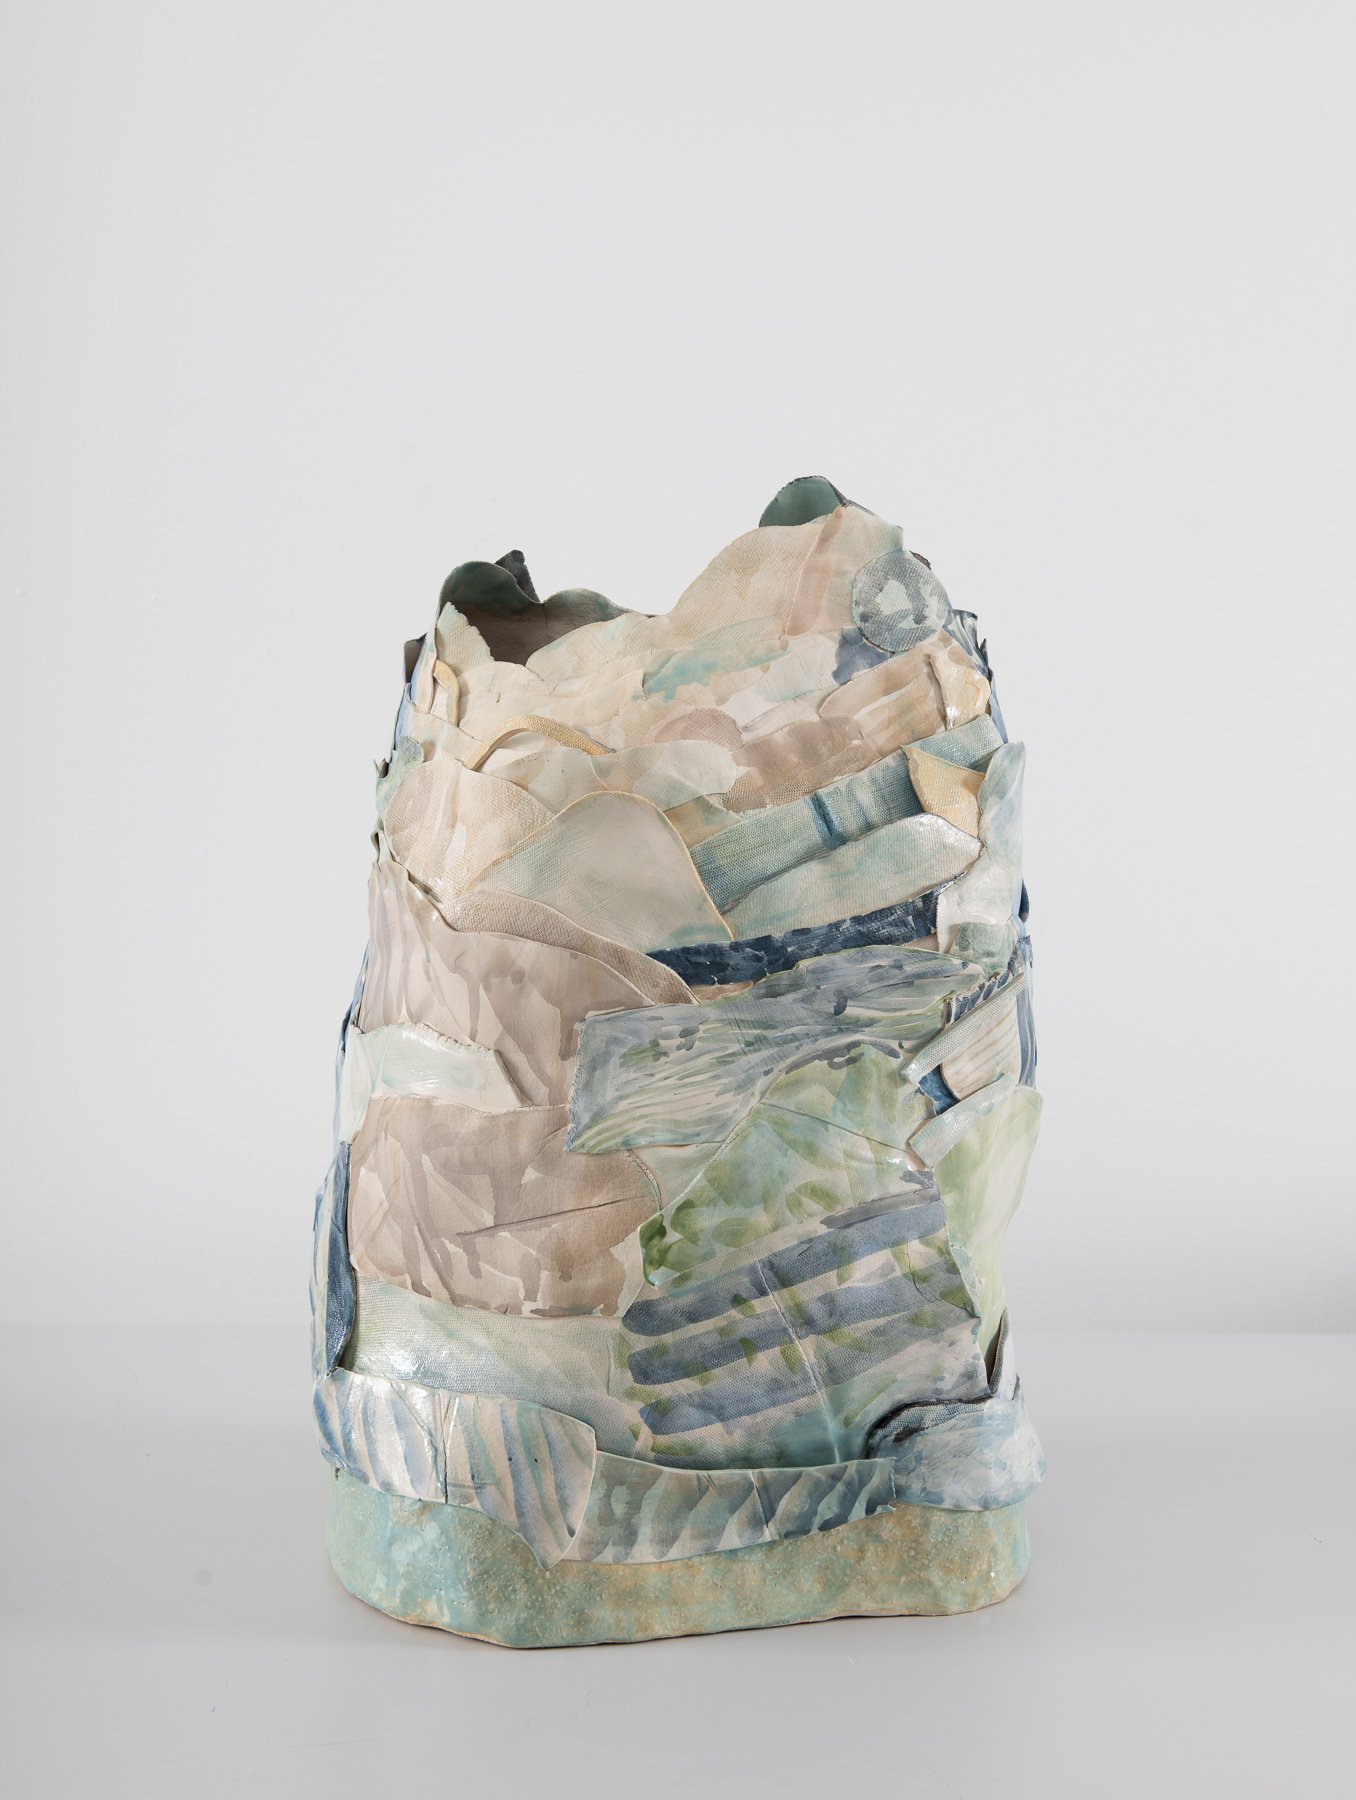 Lydia SooJin Park_Human in Nature_2024_Slip and glazed stoneware (hand built)_34 x 30 x 47 cm.jpg